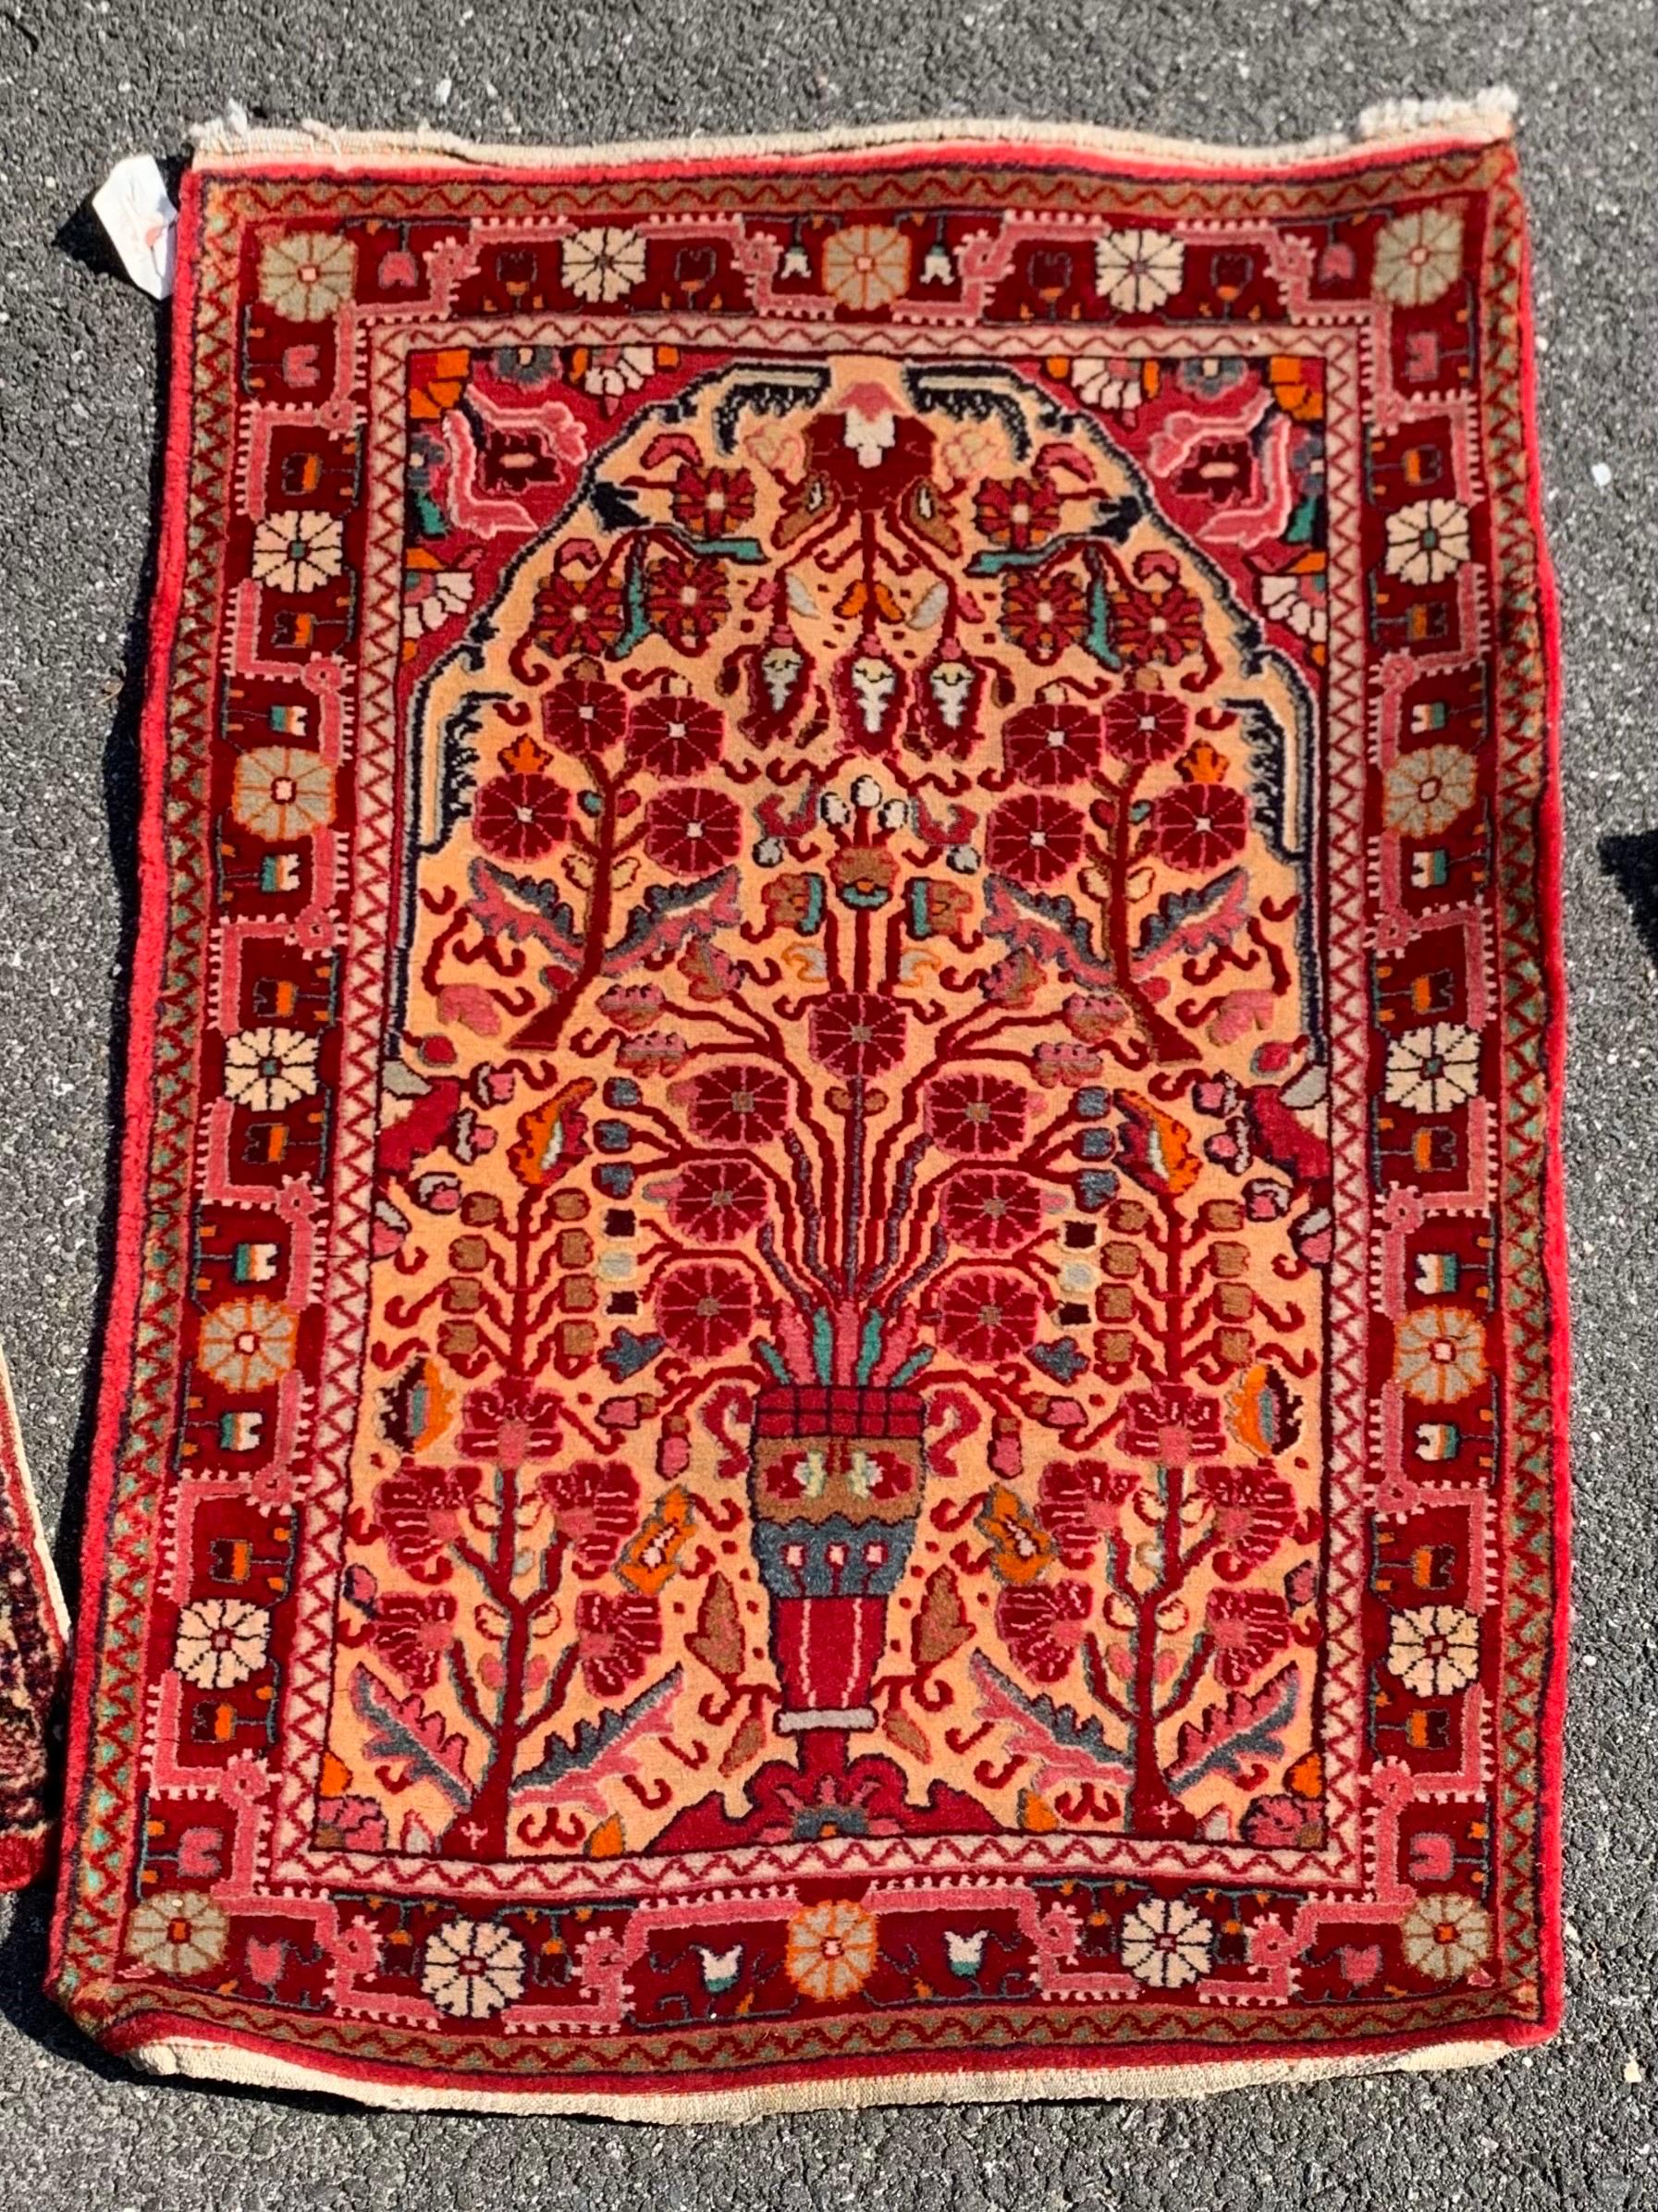 Sarouk Farahan Antique Red Embroidered Sarouk Small Mini Persian Rug c. 1920s For Sale